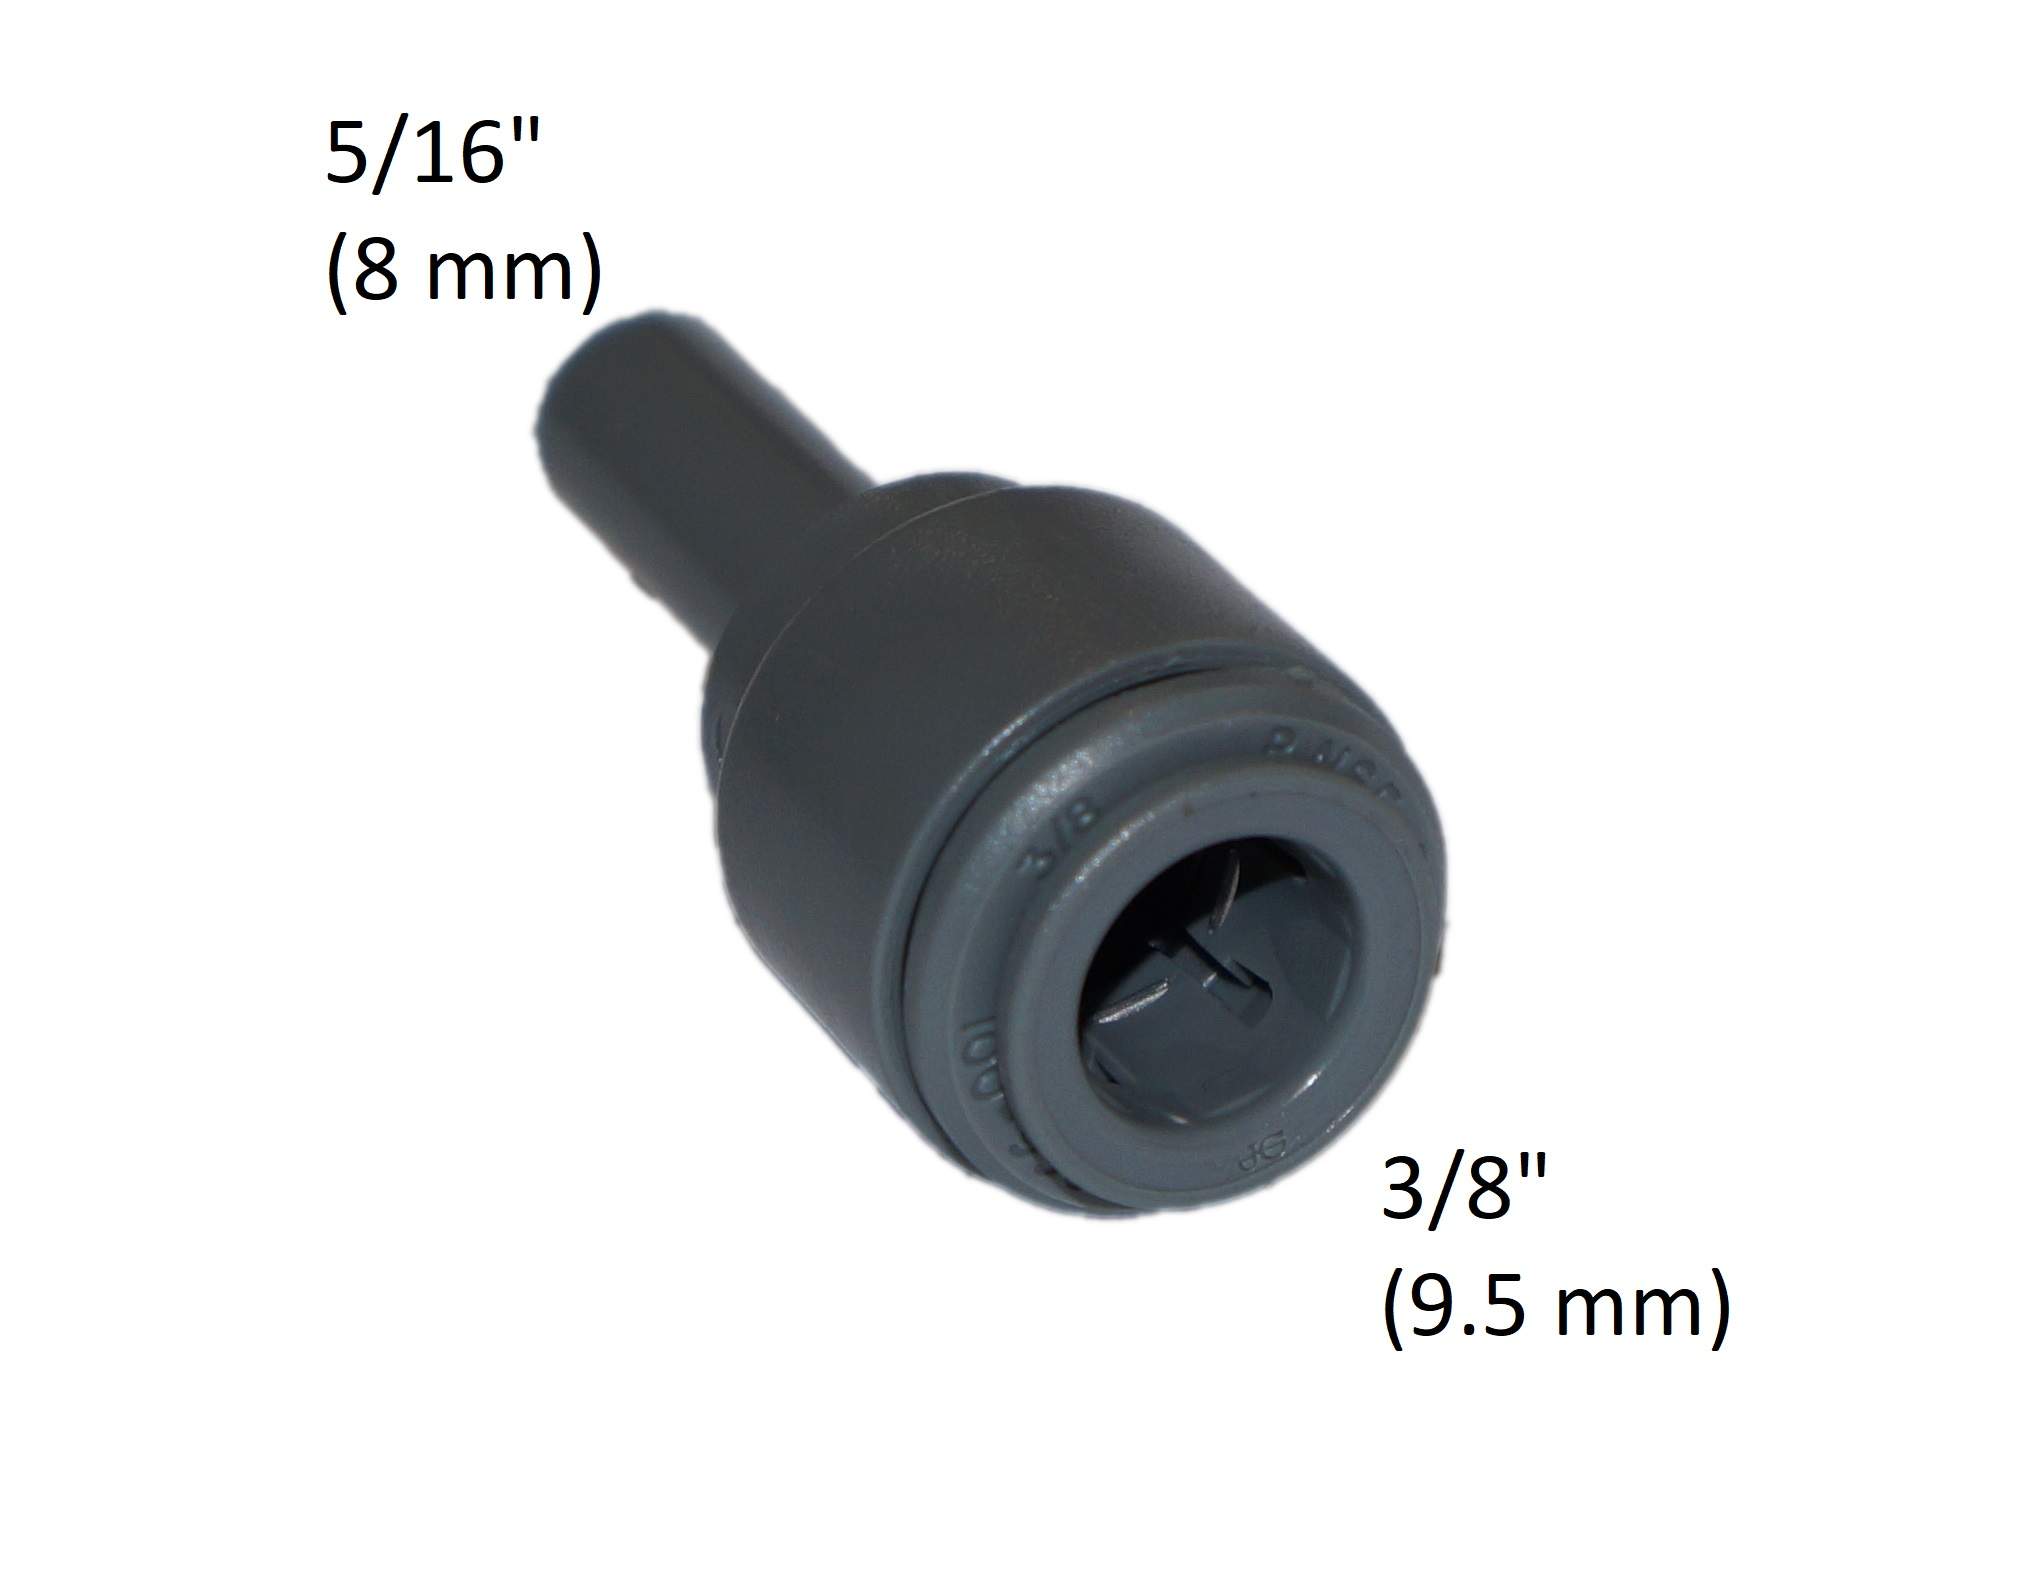 Coupling for 3/8" (9.5 mm) tube to 5/16" (8mm) socket